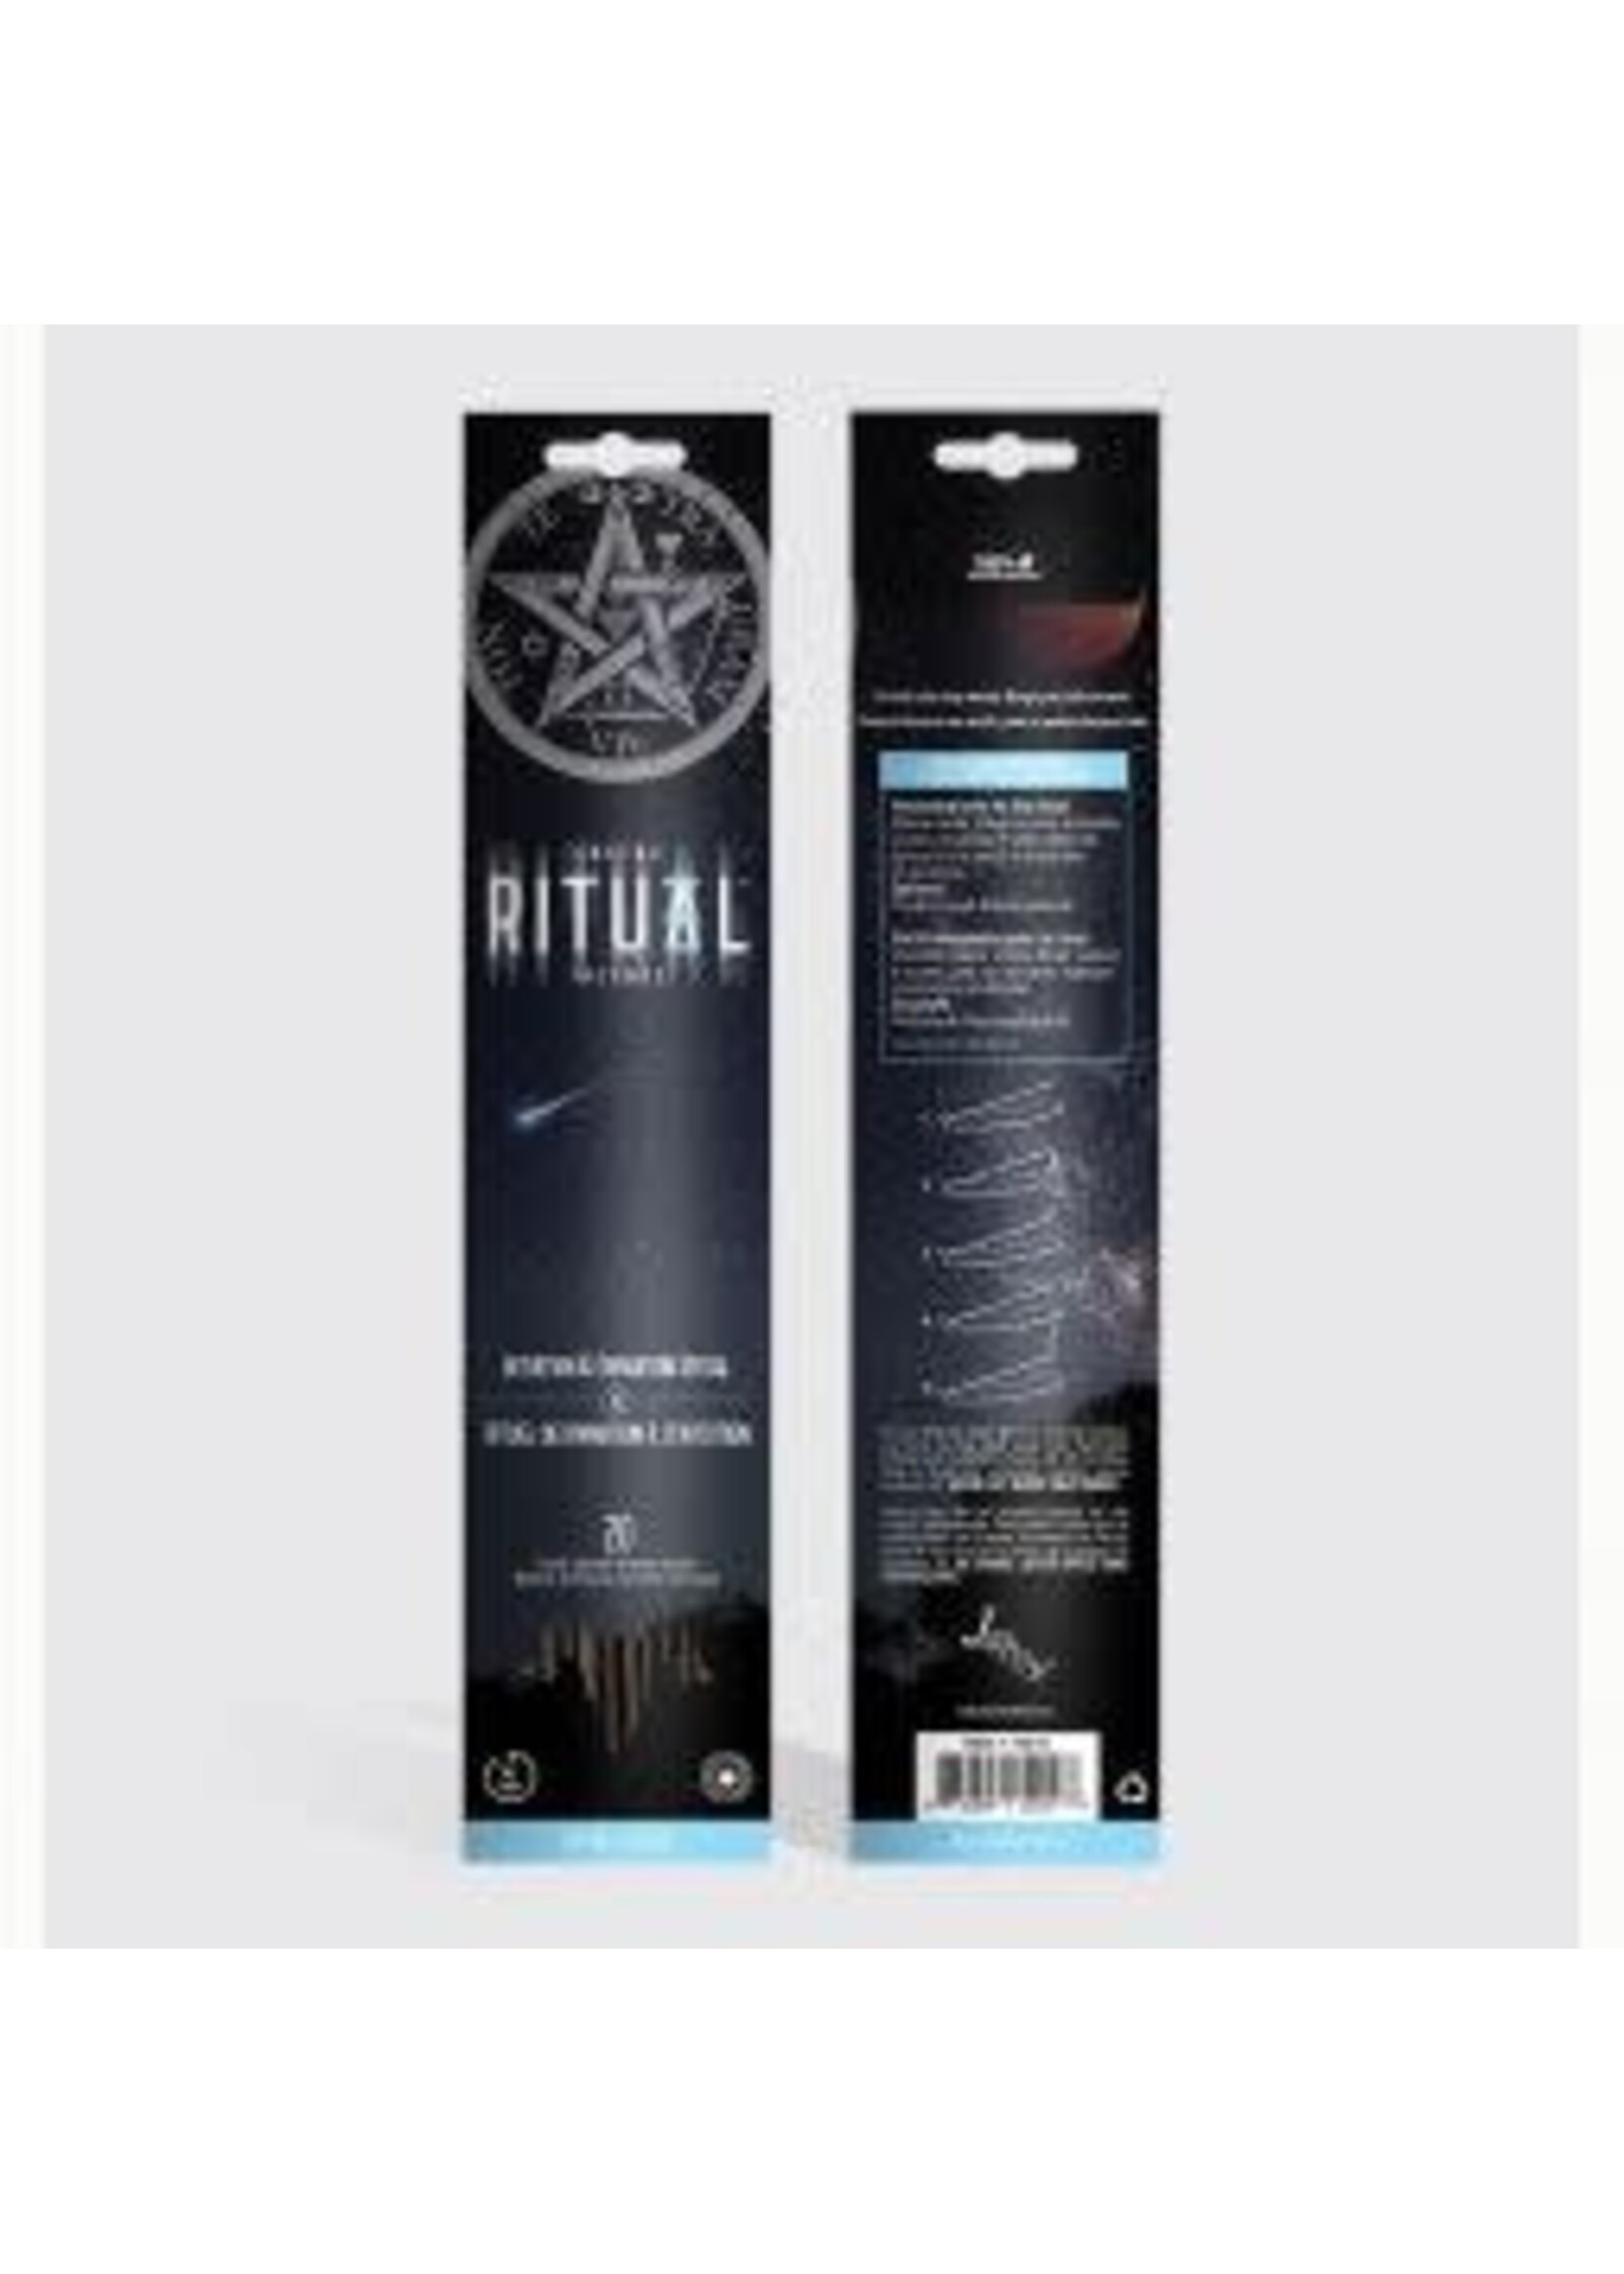 Ritual Incense Intuition & Divination